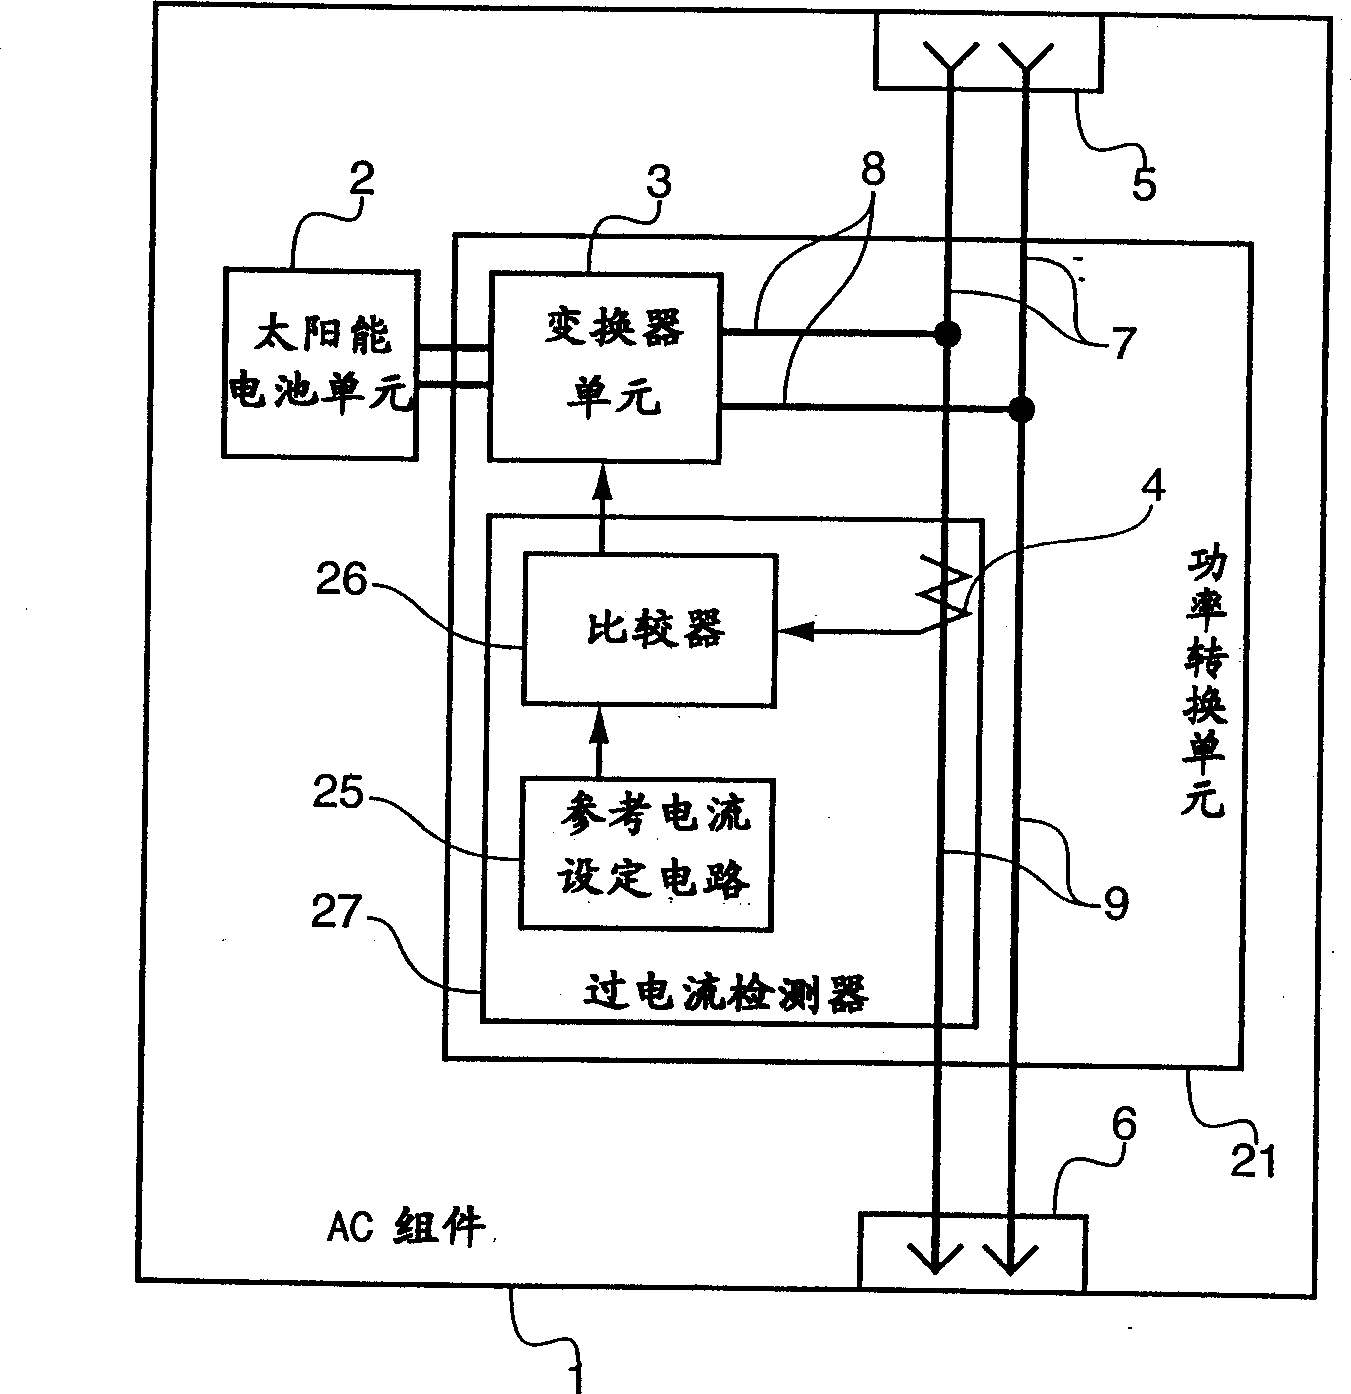 Solar cell assembly and electric generating device